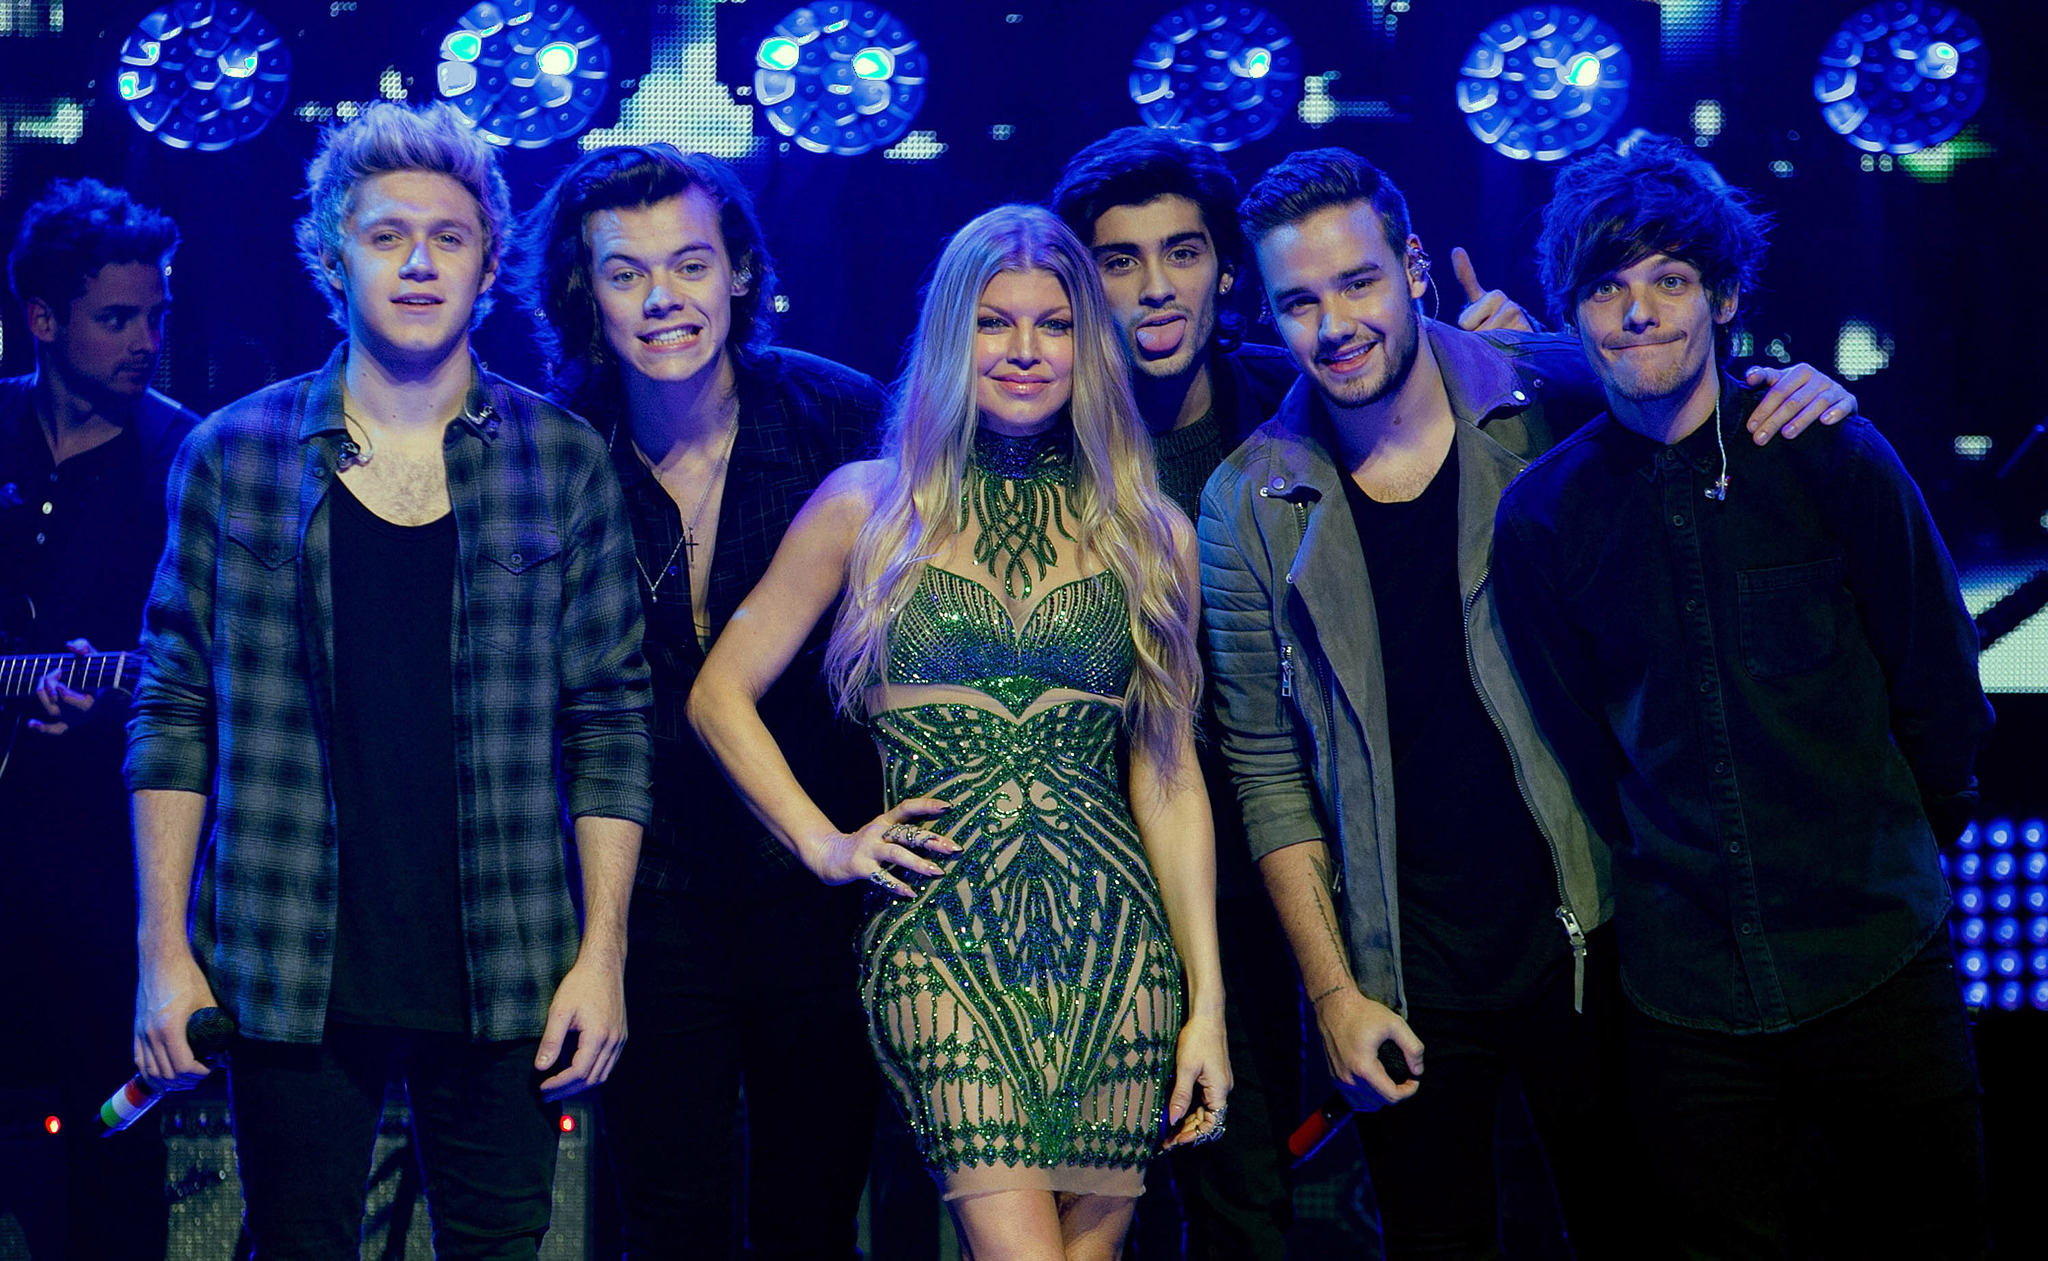 Fergie, Liam Payne, Harry Styles, Zayn Malik, Niall Horan and Louis Tomlinson at event of Dick Clark's Primetime New Year's Rockin' Eve with Ryan Seacrest 2015 (2014)